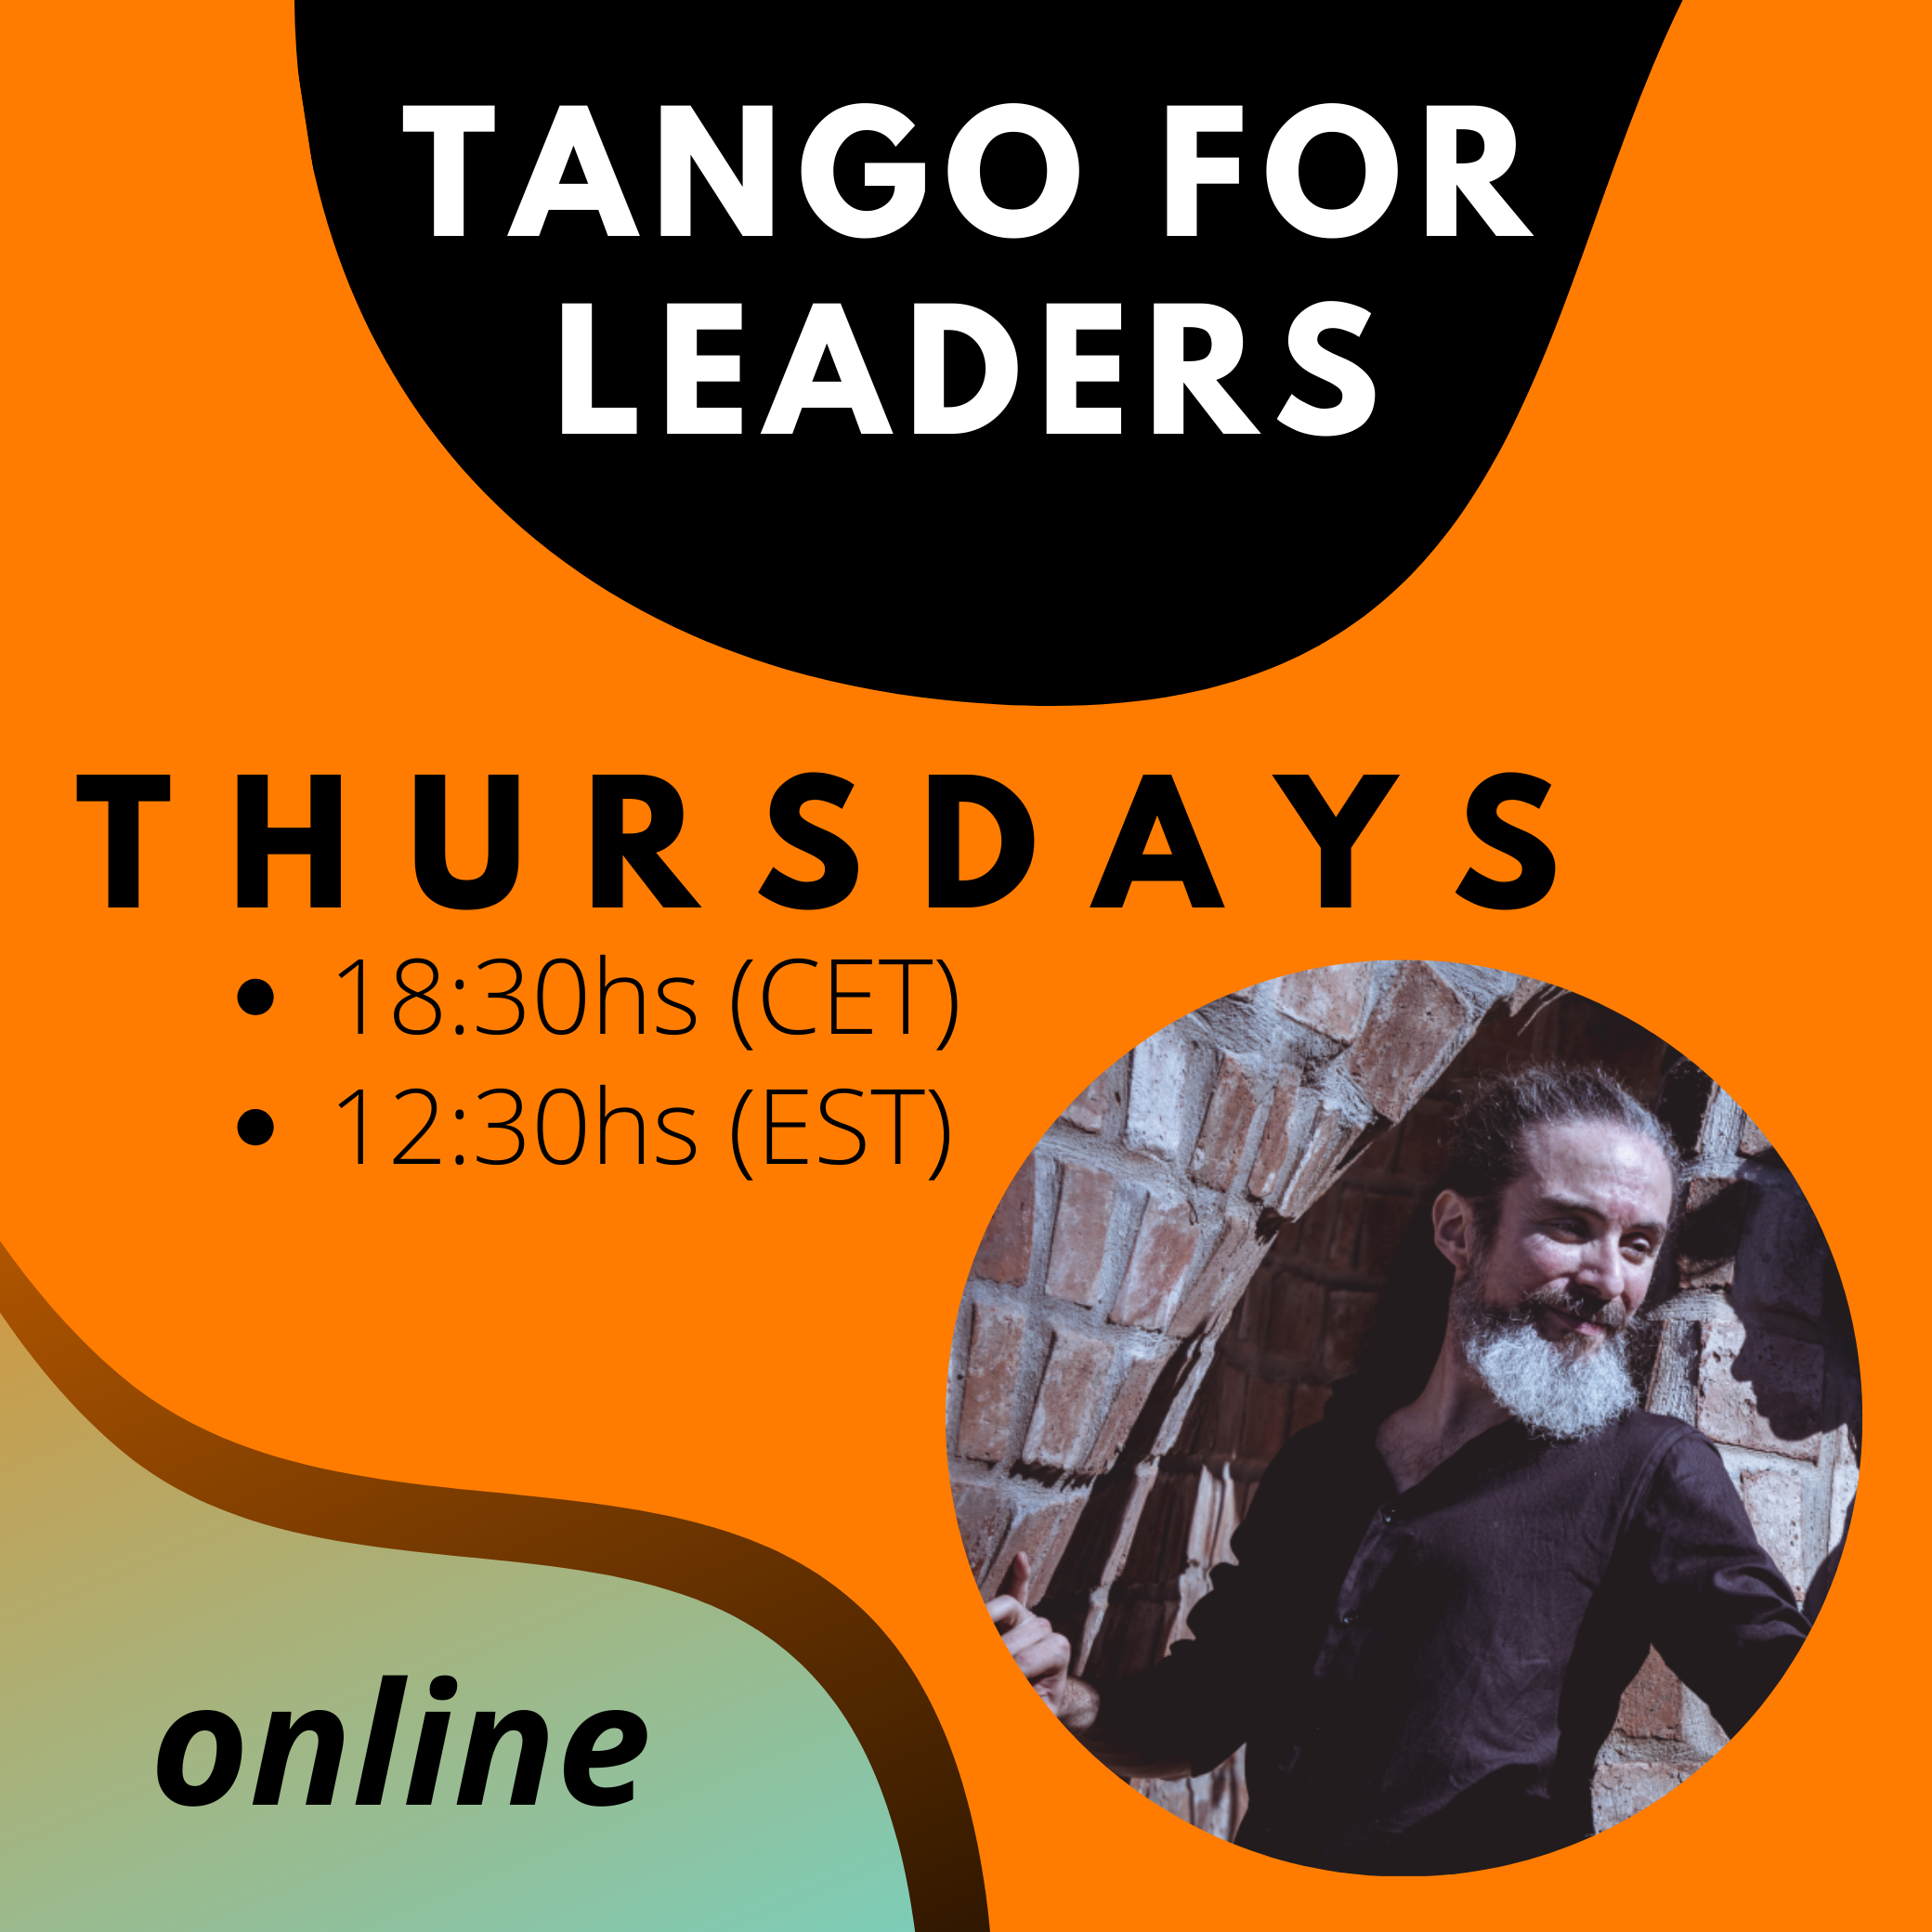 Tango for Leaders